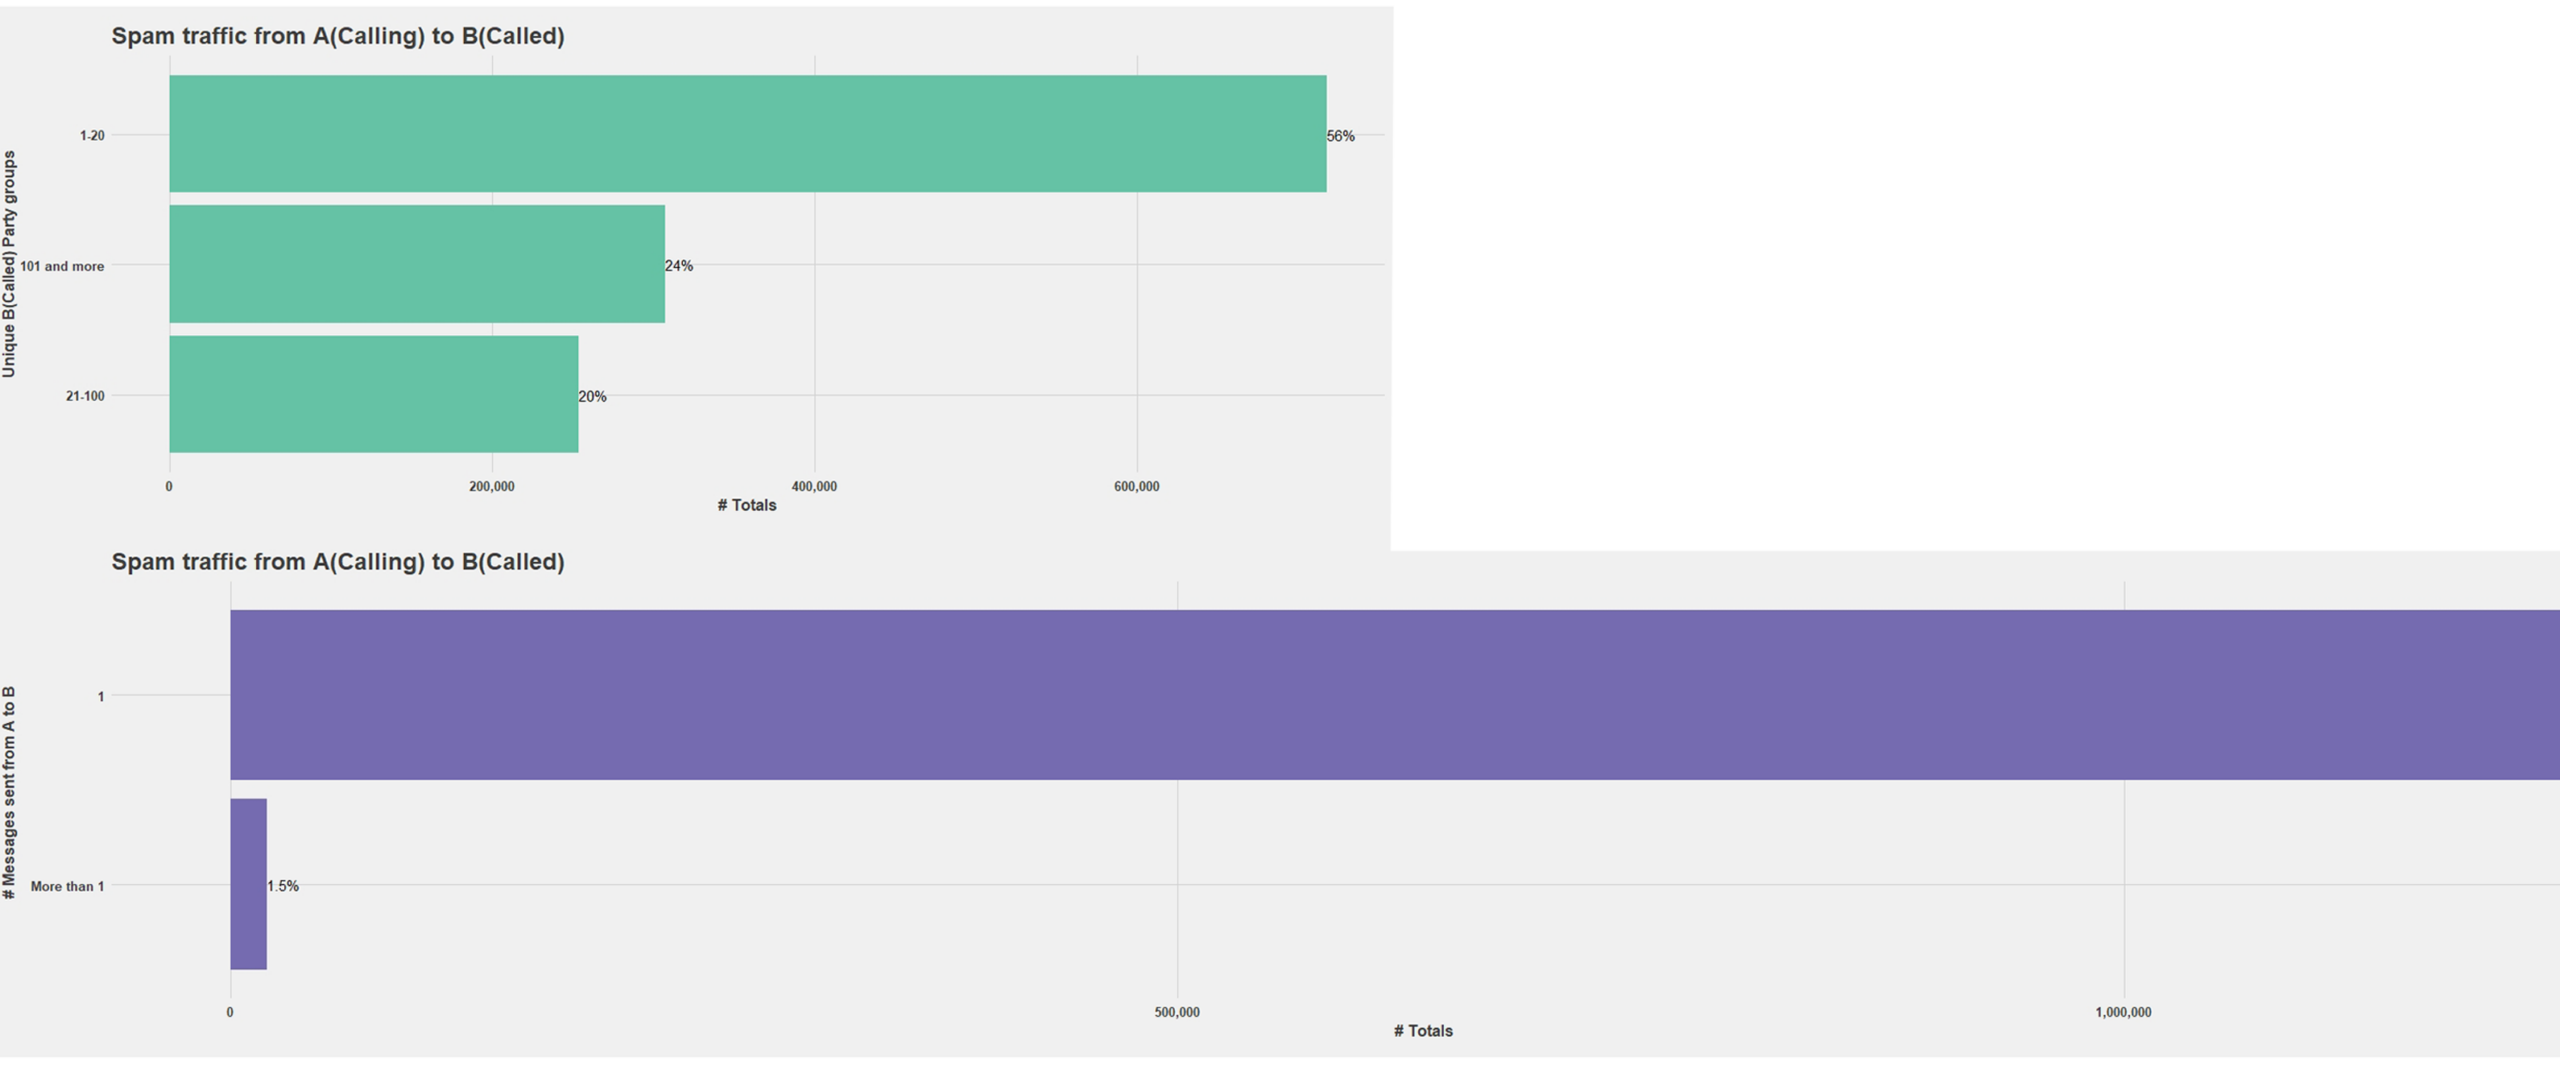 Two bar charts analyzing messaging patterns relating to SMS spam